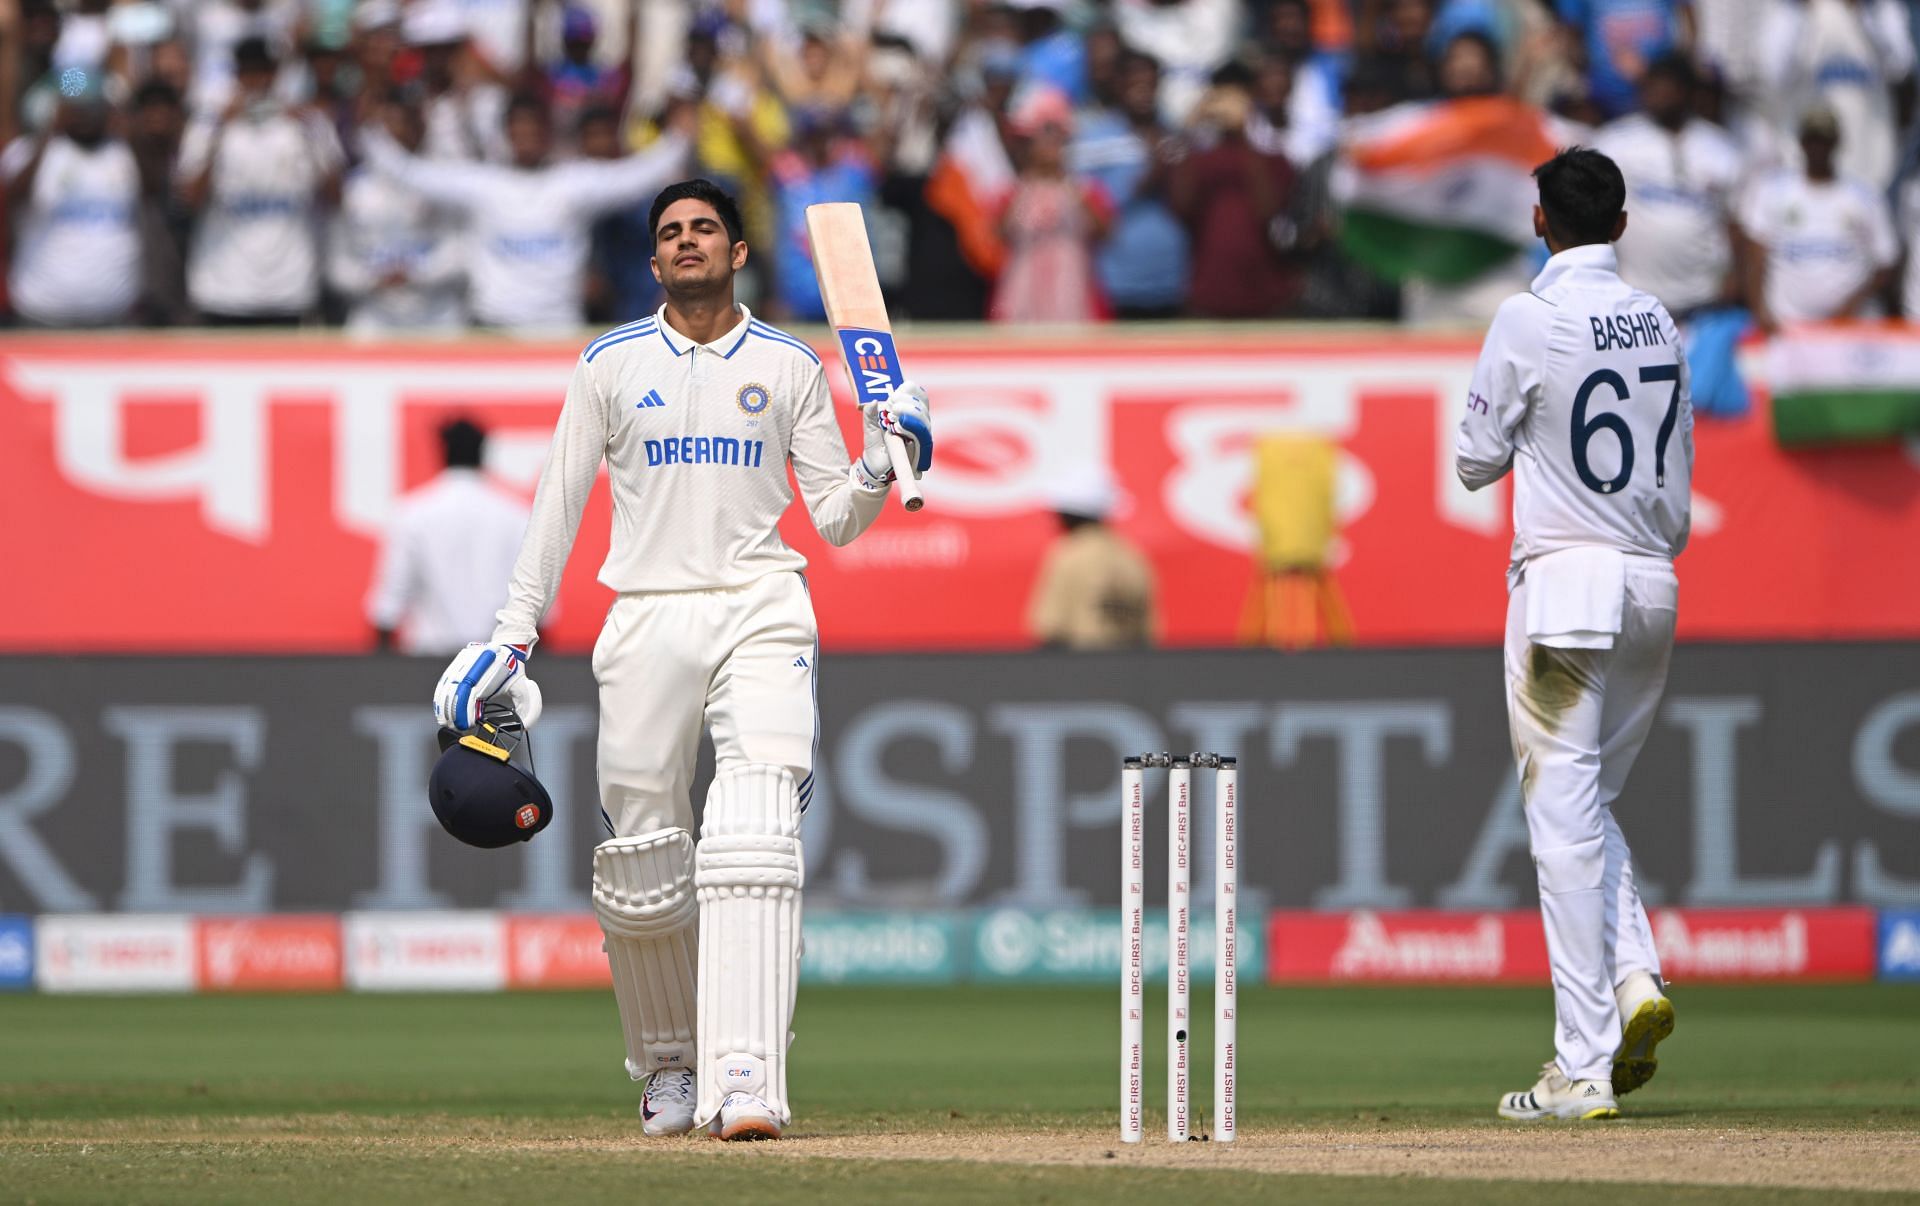 Shubman Gill scored a century in the second innings of the second Test. [P/C: Getty]